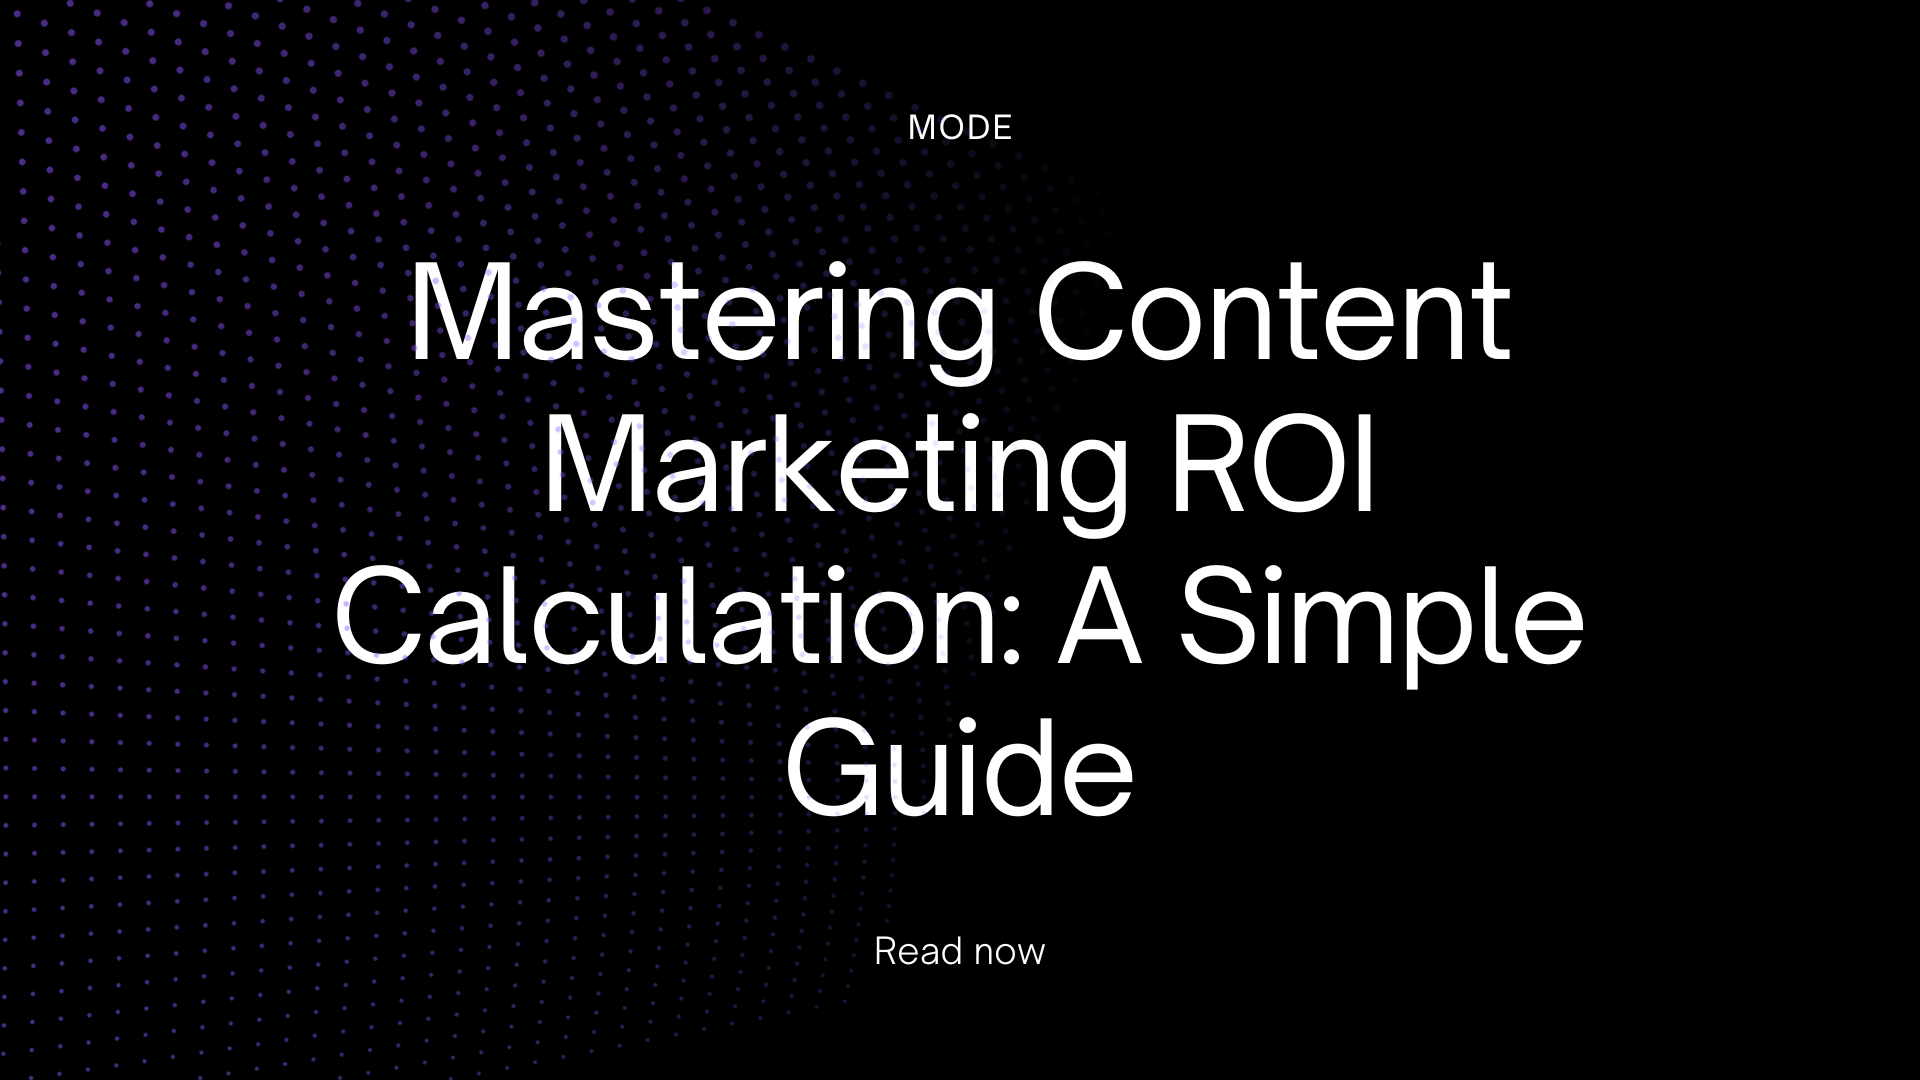 Mastering Content Marketing ROI Calculation: A Simple Guide